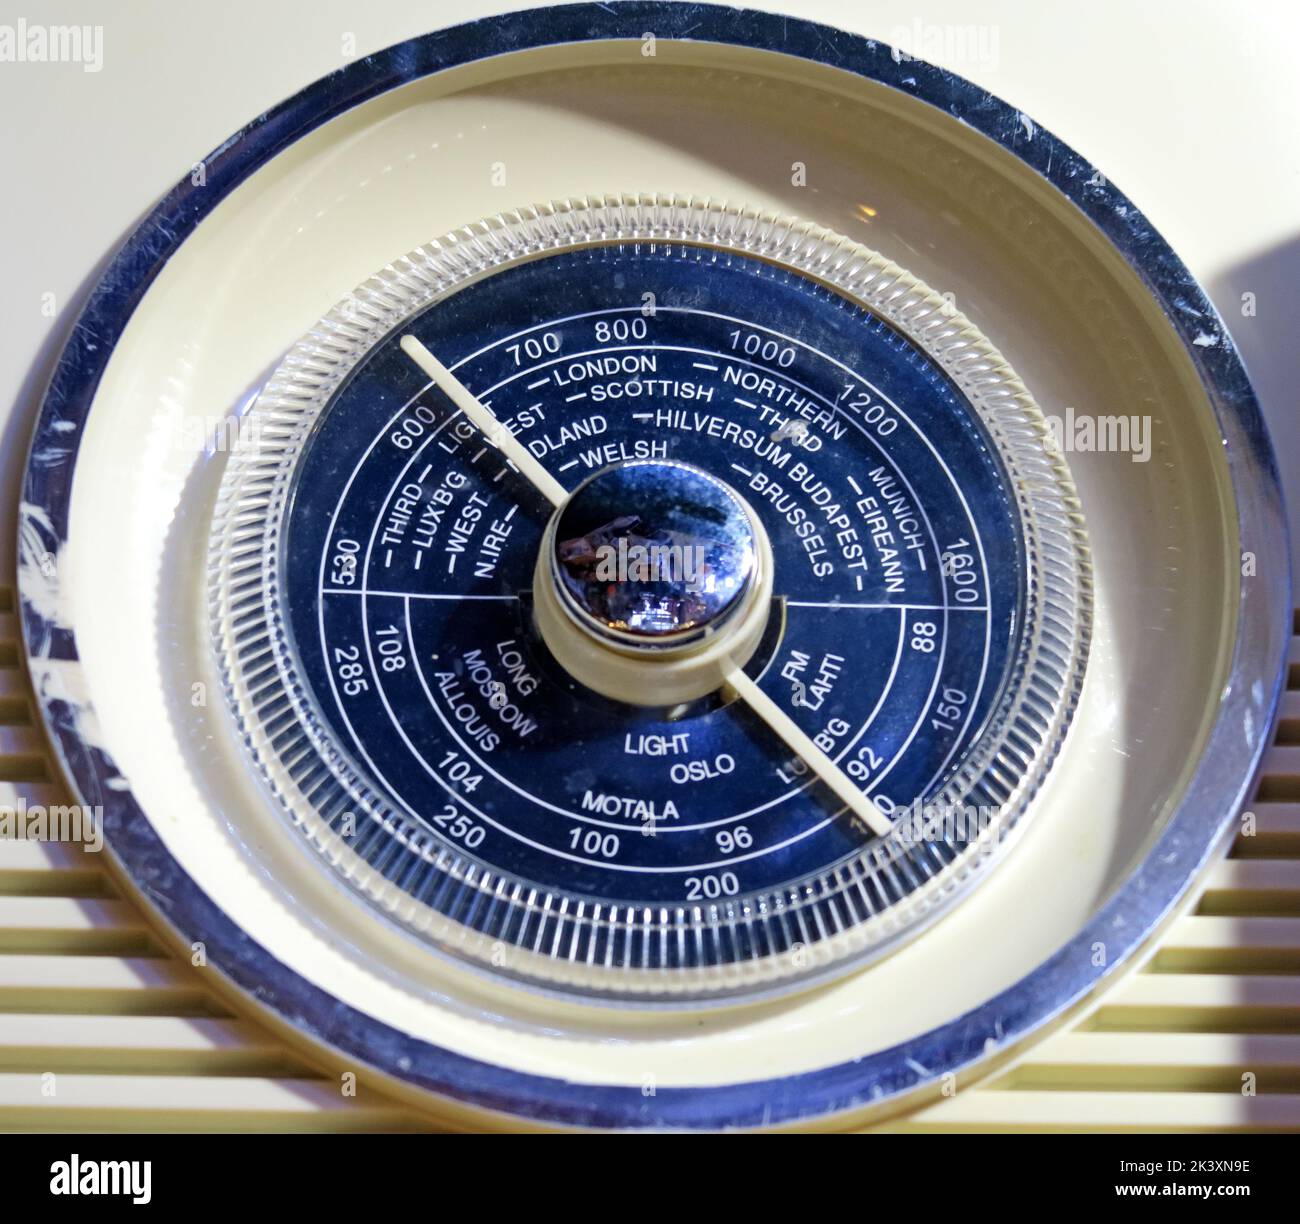 Fm Radio Frequency Dial Tune Stock Photos - 1,353 Images